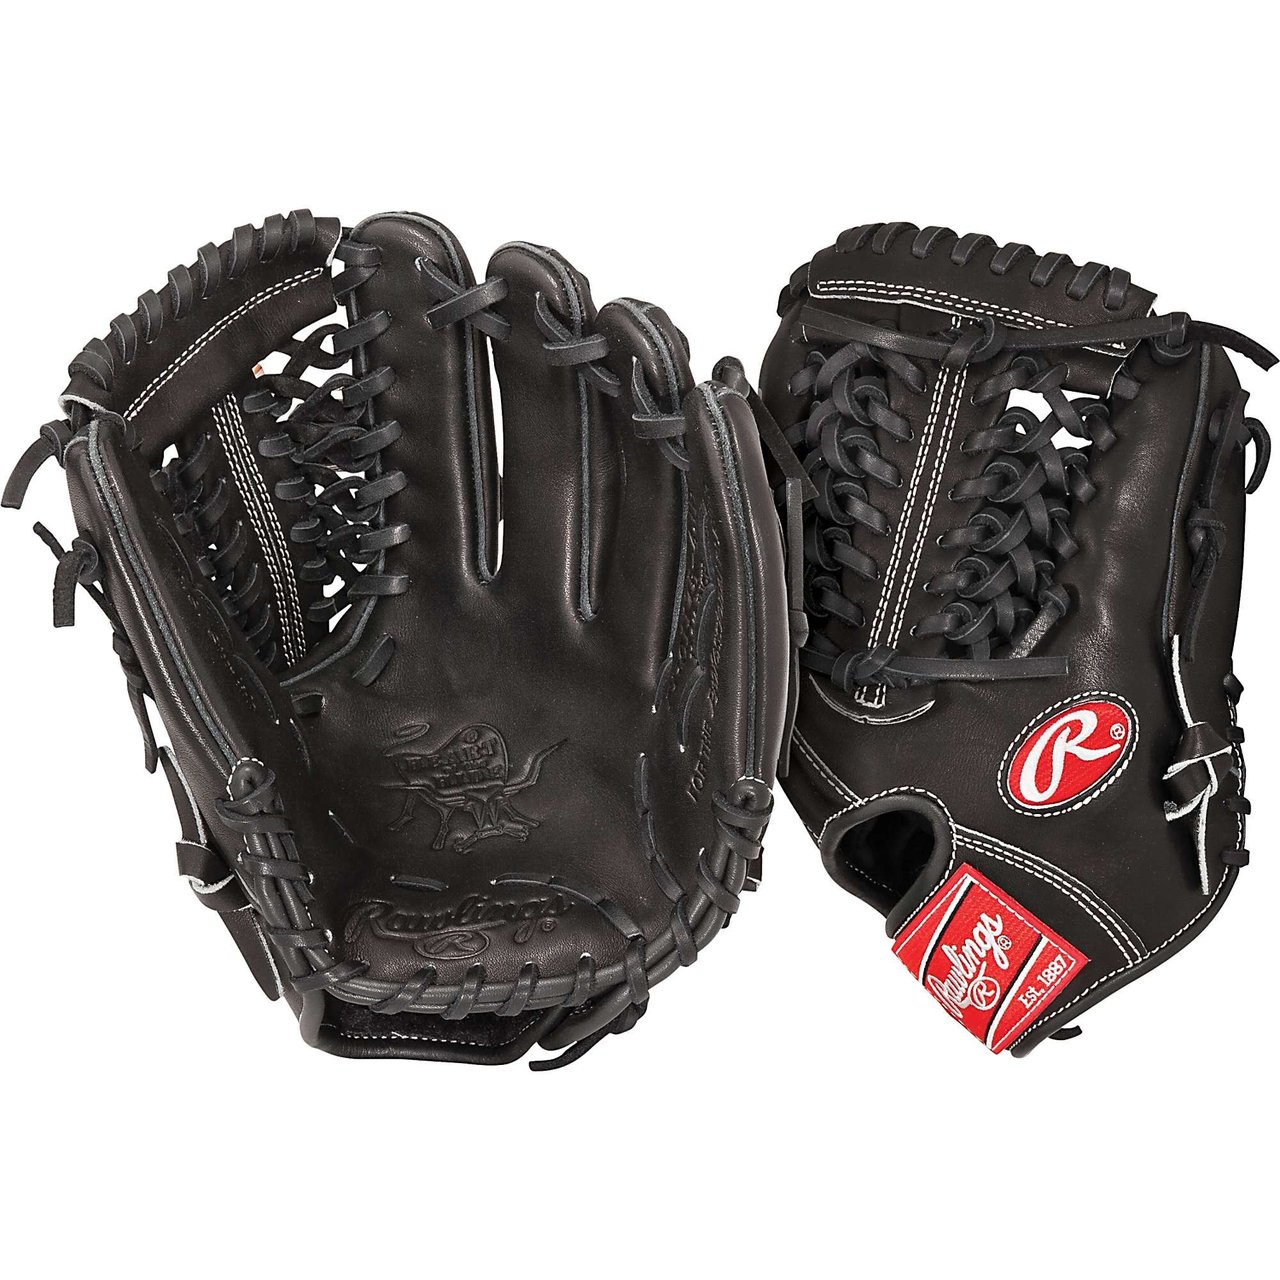 Rawlings PRO1175-4JB Heart of the Hide 11.75 inch Baseball Glove (Right Handed Throw) : This Heart of the Hide baseball glove from Rawlings features the Modified Trap-Eze Web pattern, which is an extremely strong web that provides ball snagging functionality. With its 11 34 pattern, this glove is our most popular model and at the Pro Level is primarily used at the shortstoppitcher position and at the collegianthighschool level it can be used at 2nd, 3rd, and shortstop. Handcrafted from the top 5% of steer hides and the best pro grade lace, the Heart of the Hide gloves durability remains unmatched. Its Conventional back drives flexibility and strength.